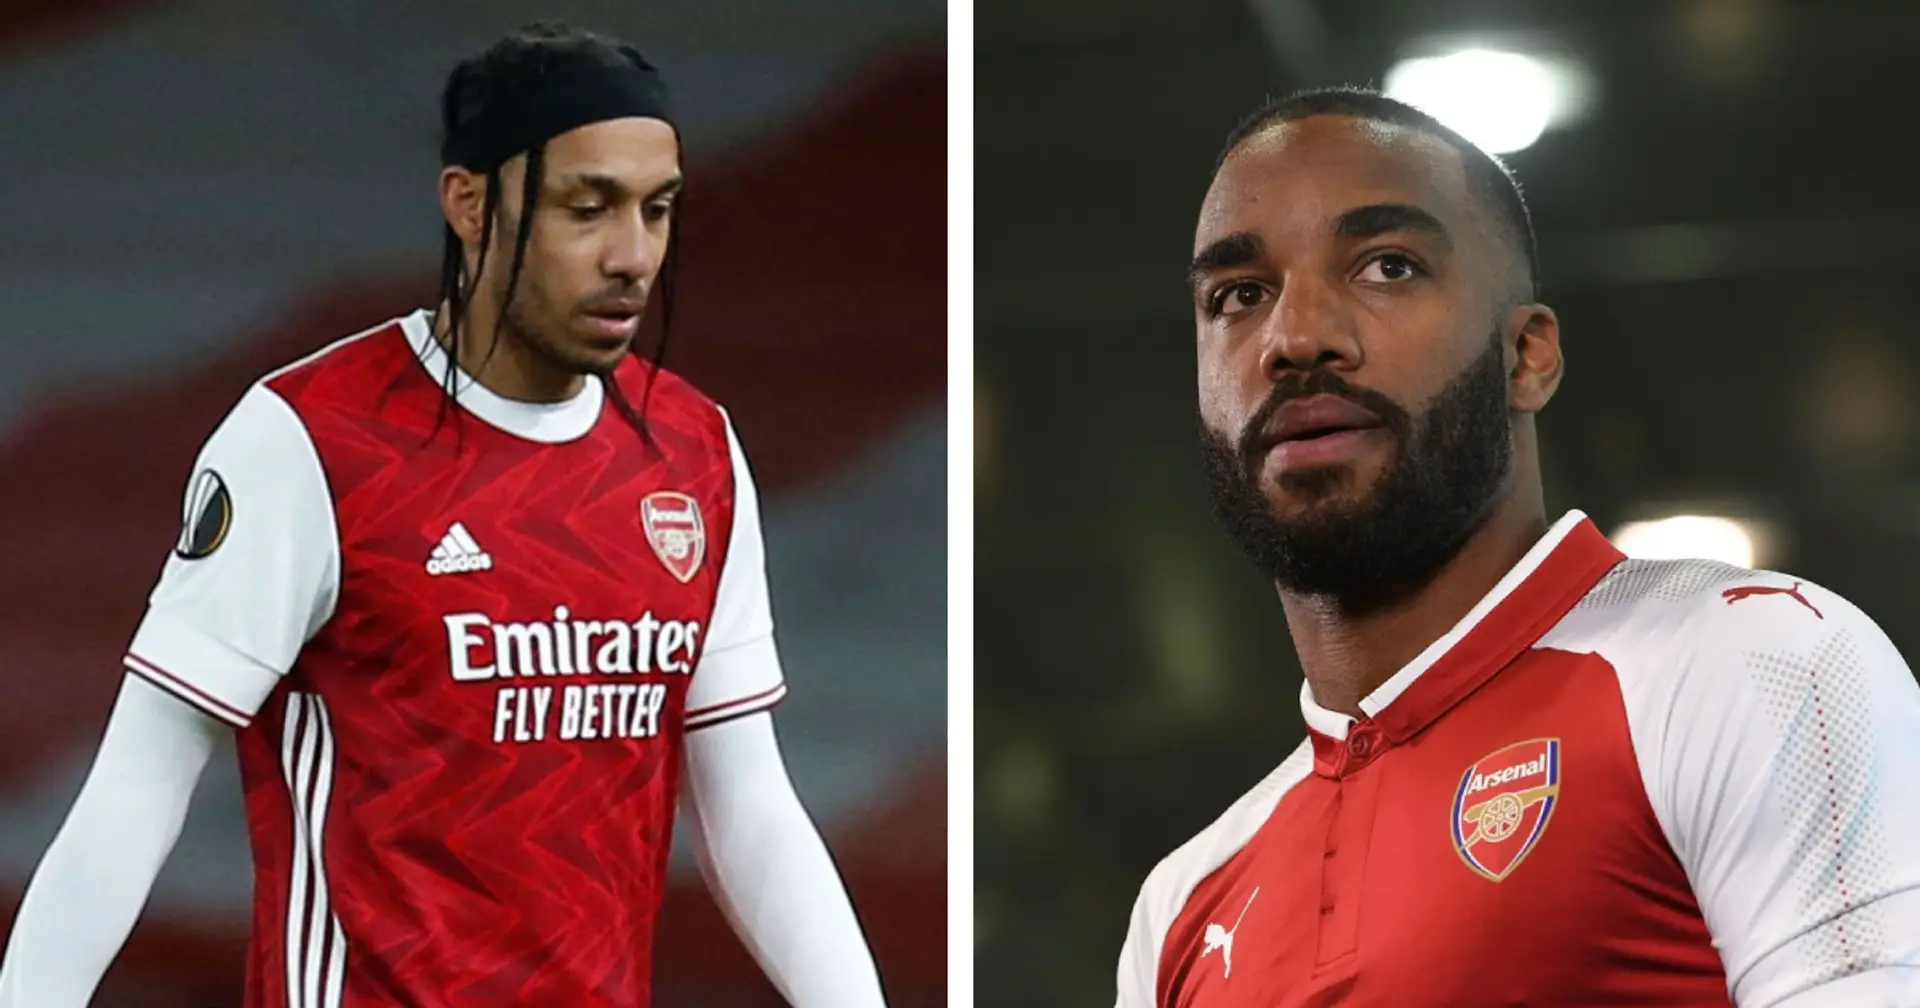 Daily Mail: Arsenal 'have concerns' over futures of Aubameyang and Lacazette (reliability: 3 stars)